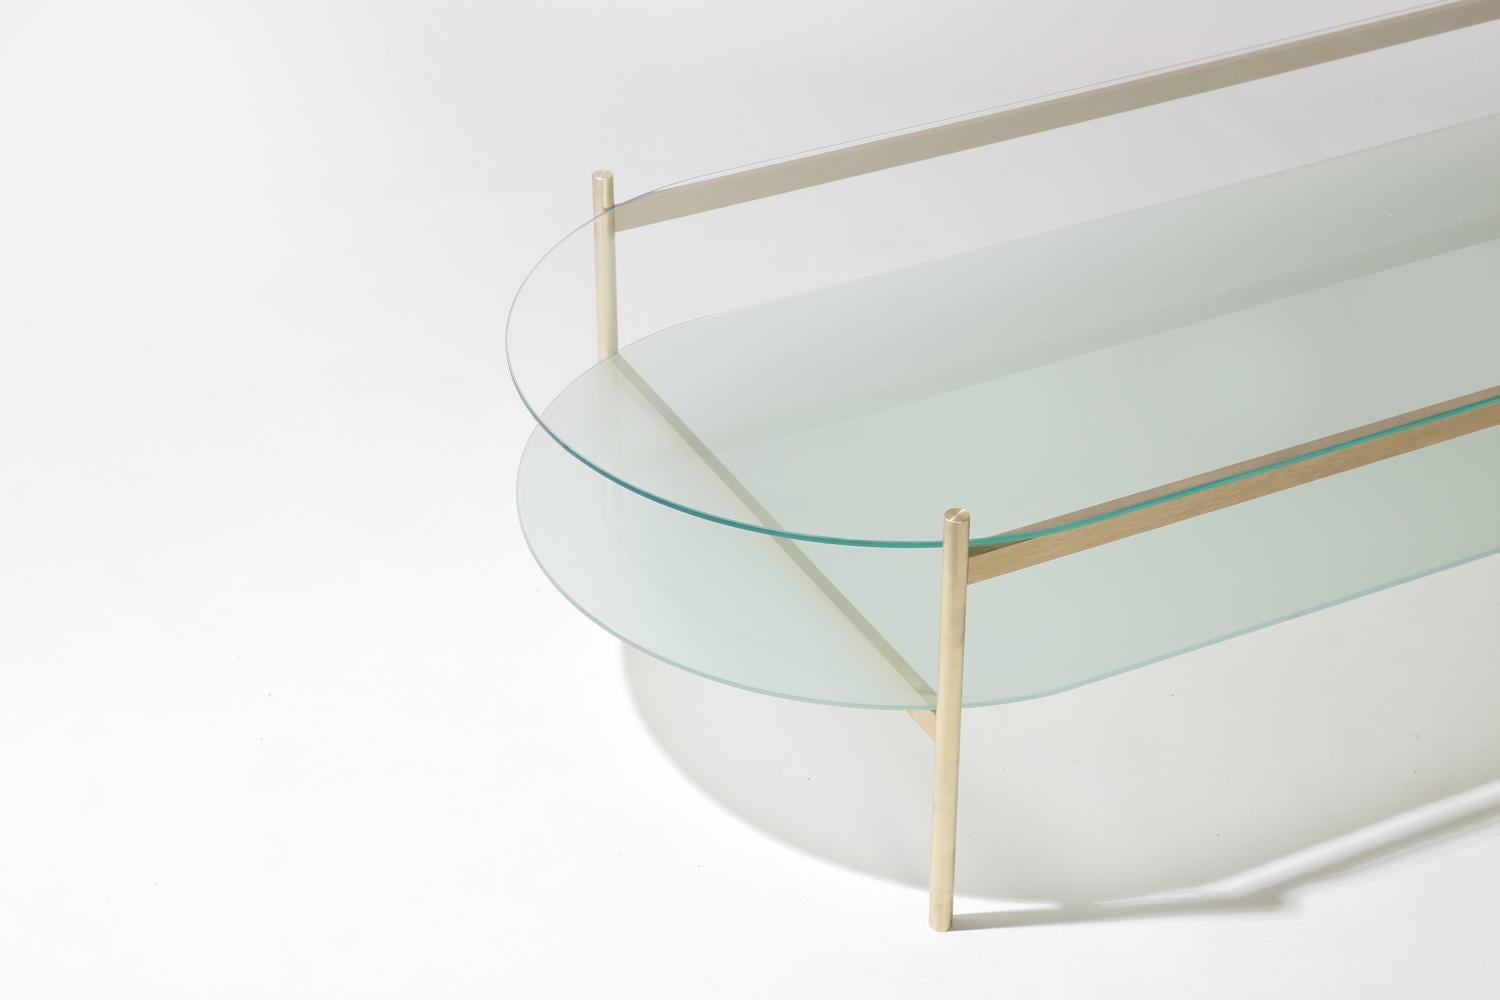 Made to order. Please allow 6 weeks for production.

Brass Frame / Clear Glass / Frosted Glass

The Duotone coffee table is a commercial grade table made from precision machined solid brass. Each table is made locally in St. Augustine, Florida